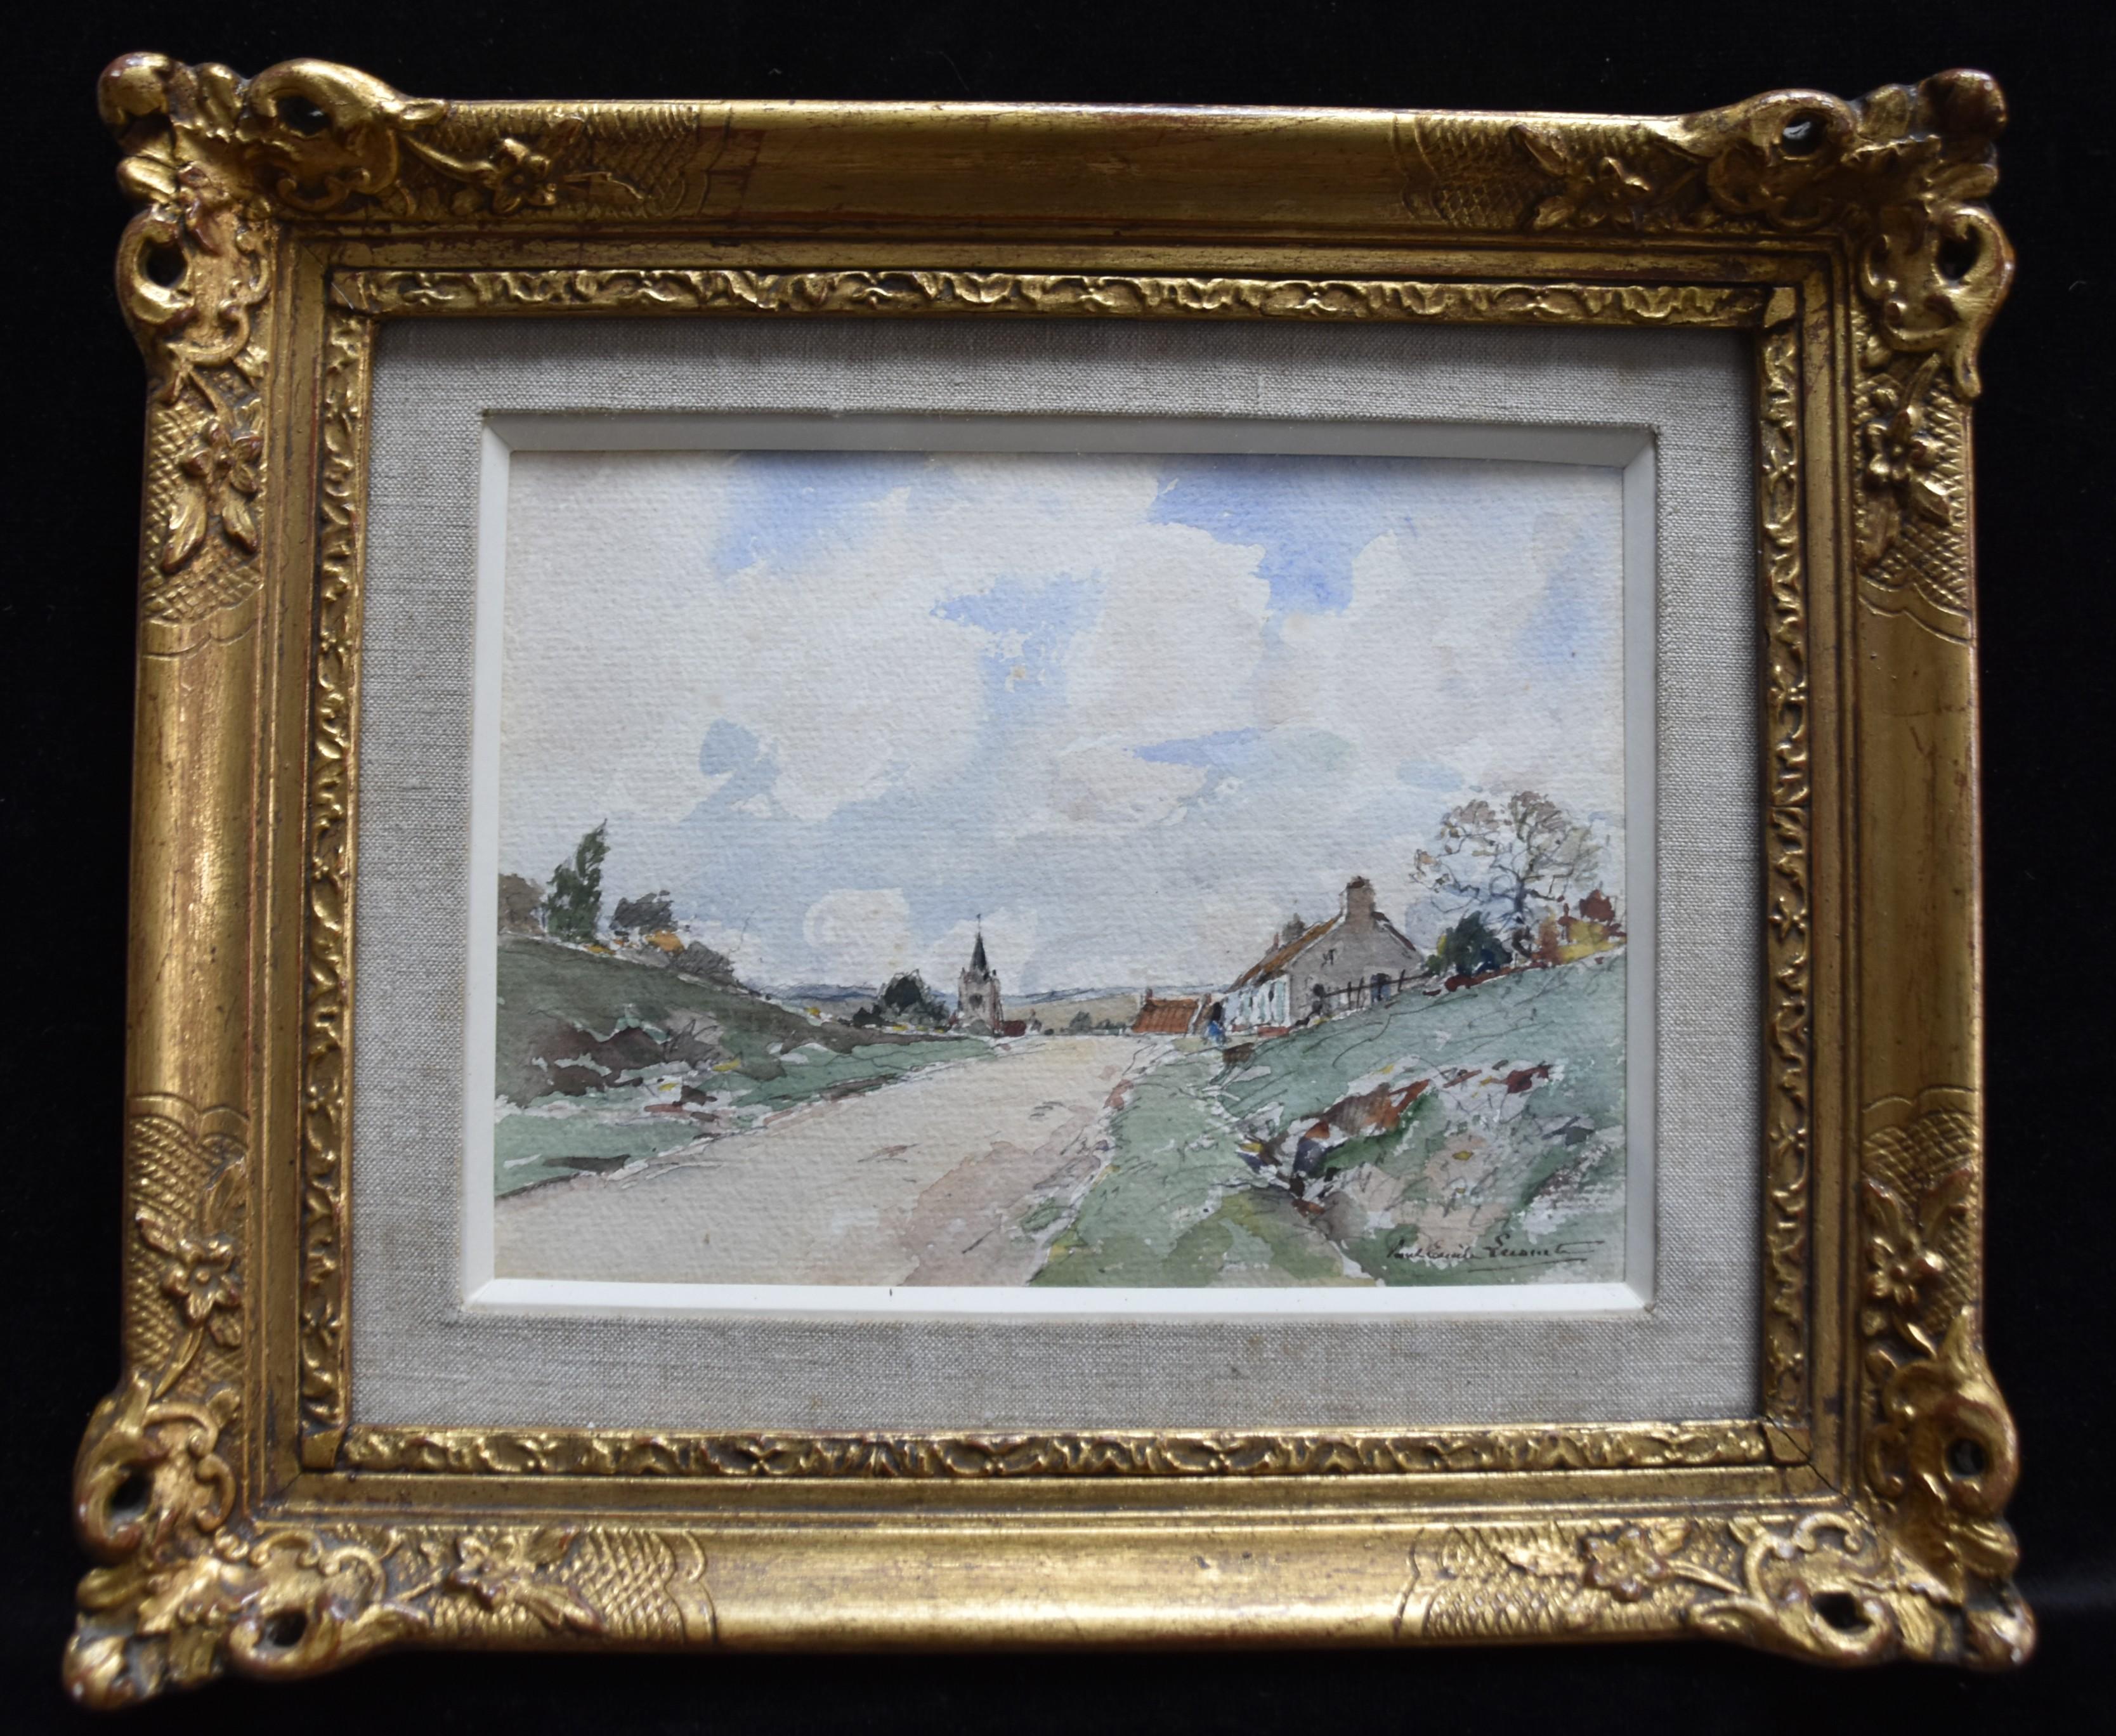 Paul Emile Lecomte (1877-1950)
A  view of a village
Signed lower right
Watercolor on paper
12.5 x 17.5 cm
In good condition, very fresh
In a beautiful frame (the upper left corner is repaired, but it'only visible from the rear) : 23 x 27.5 cm

This